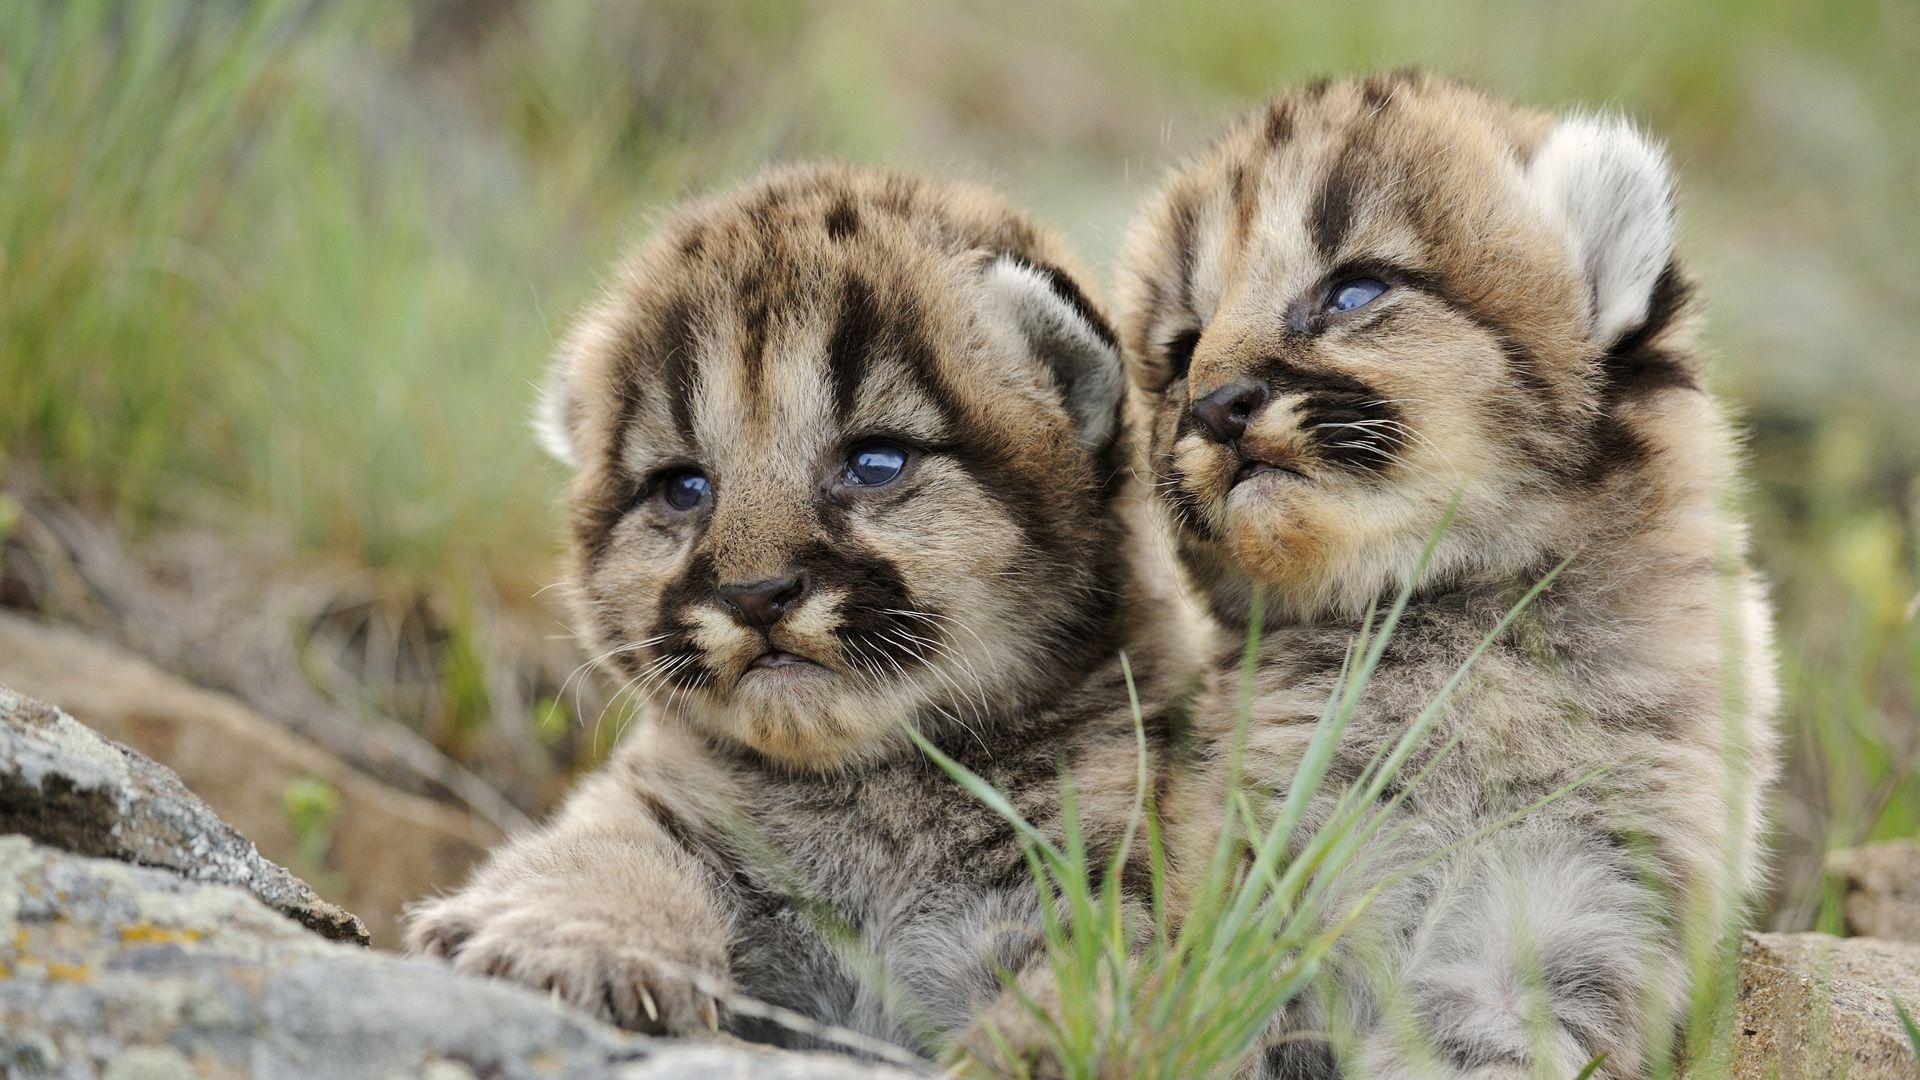 Cougars Cubs Nature Wallpaper For Android Apk